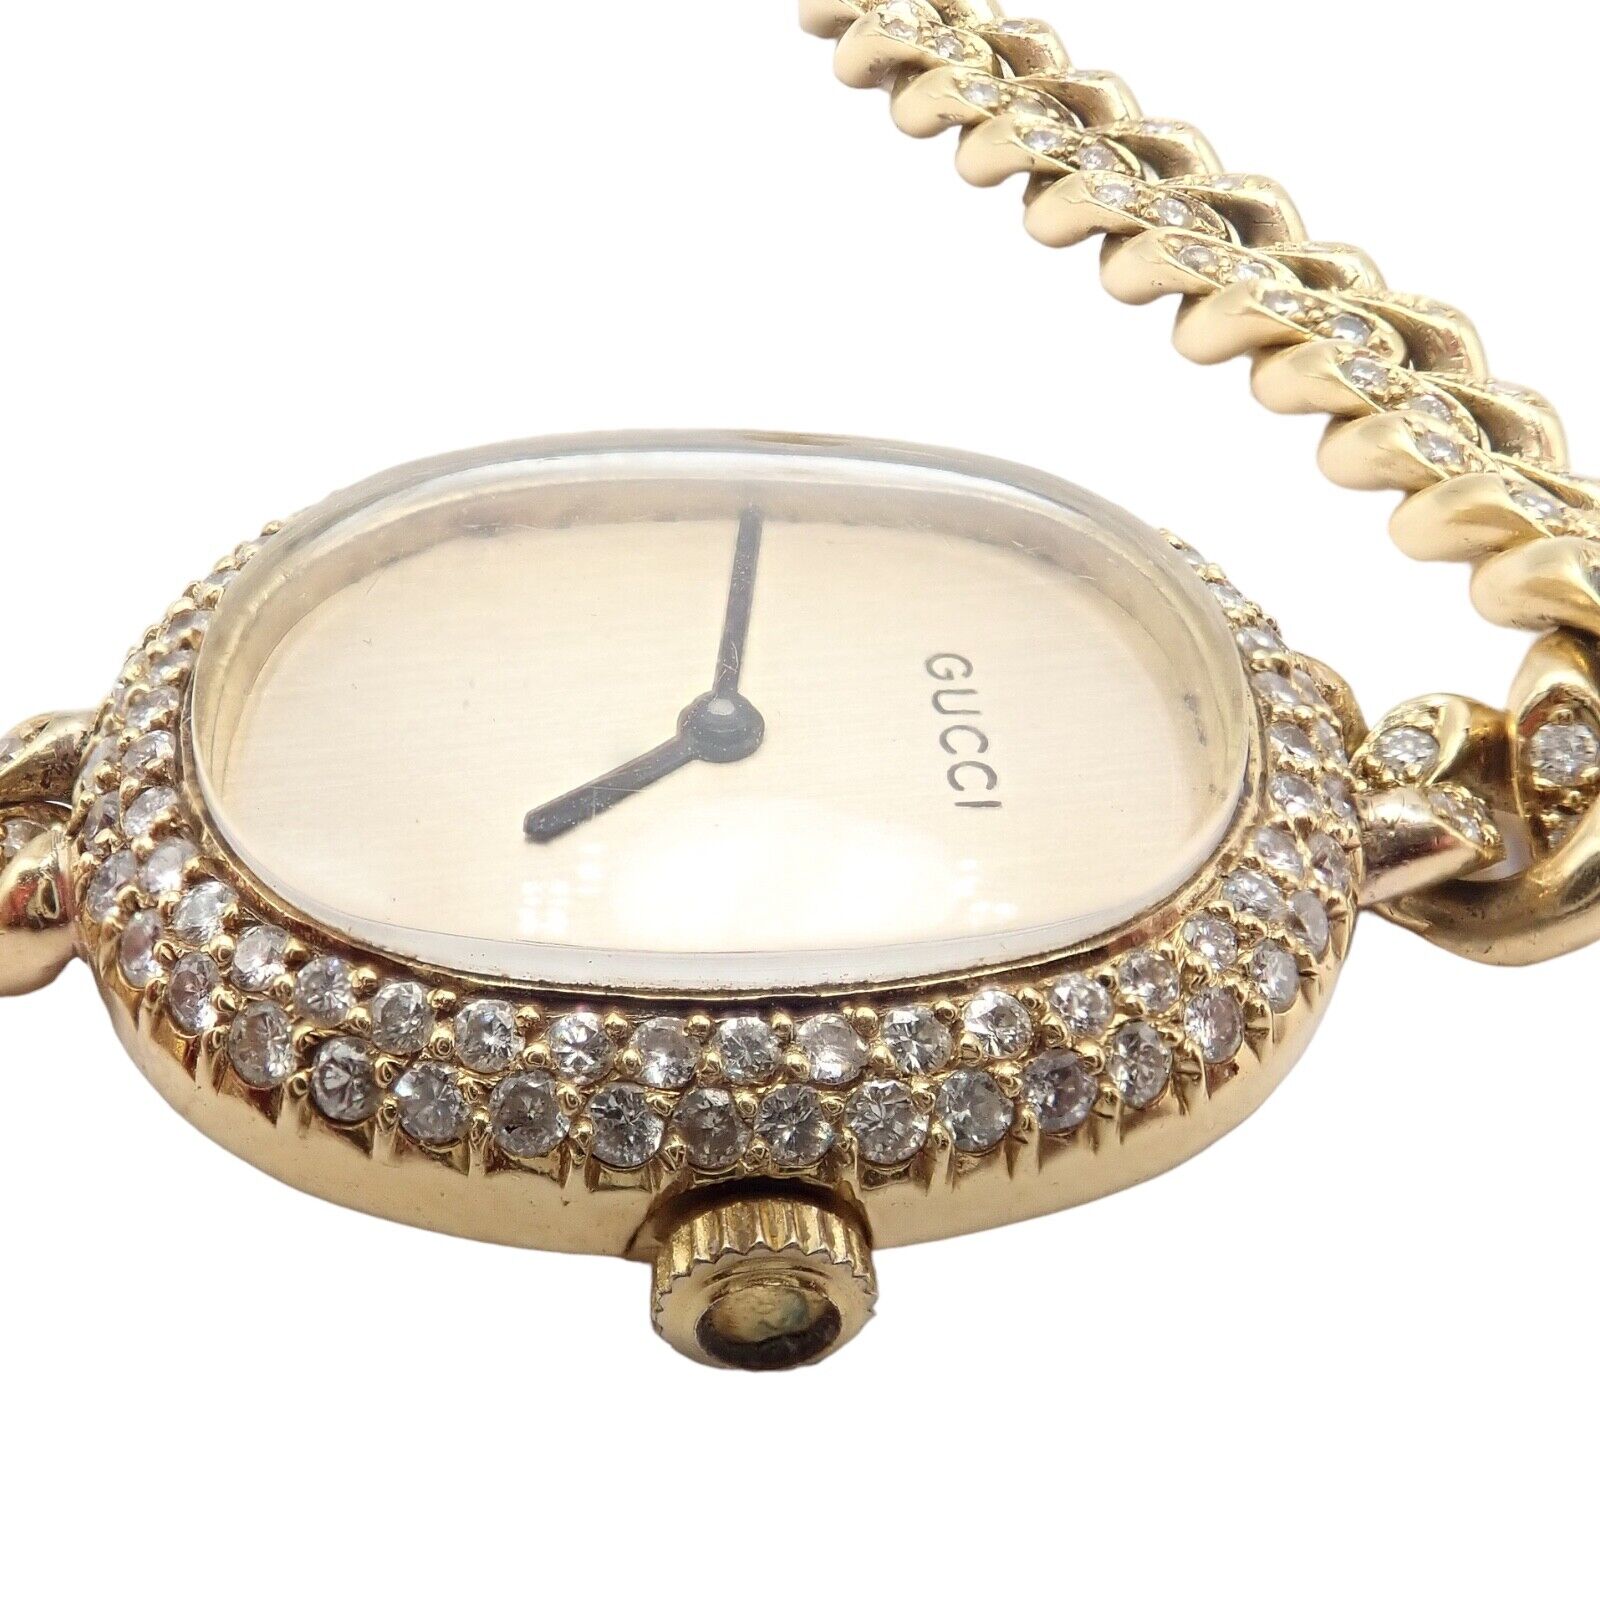 Gucci Jewelry & Watches:Watches, Parts & Accessories:Watches:Wristwatches Vintage! Gucci 18k Yellow Gold 3ctw Diamond Manual Wind Ladies Watch